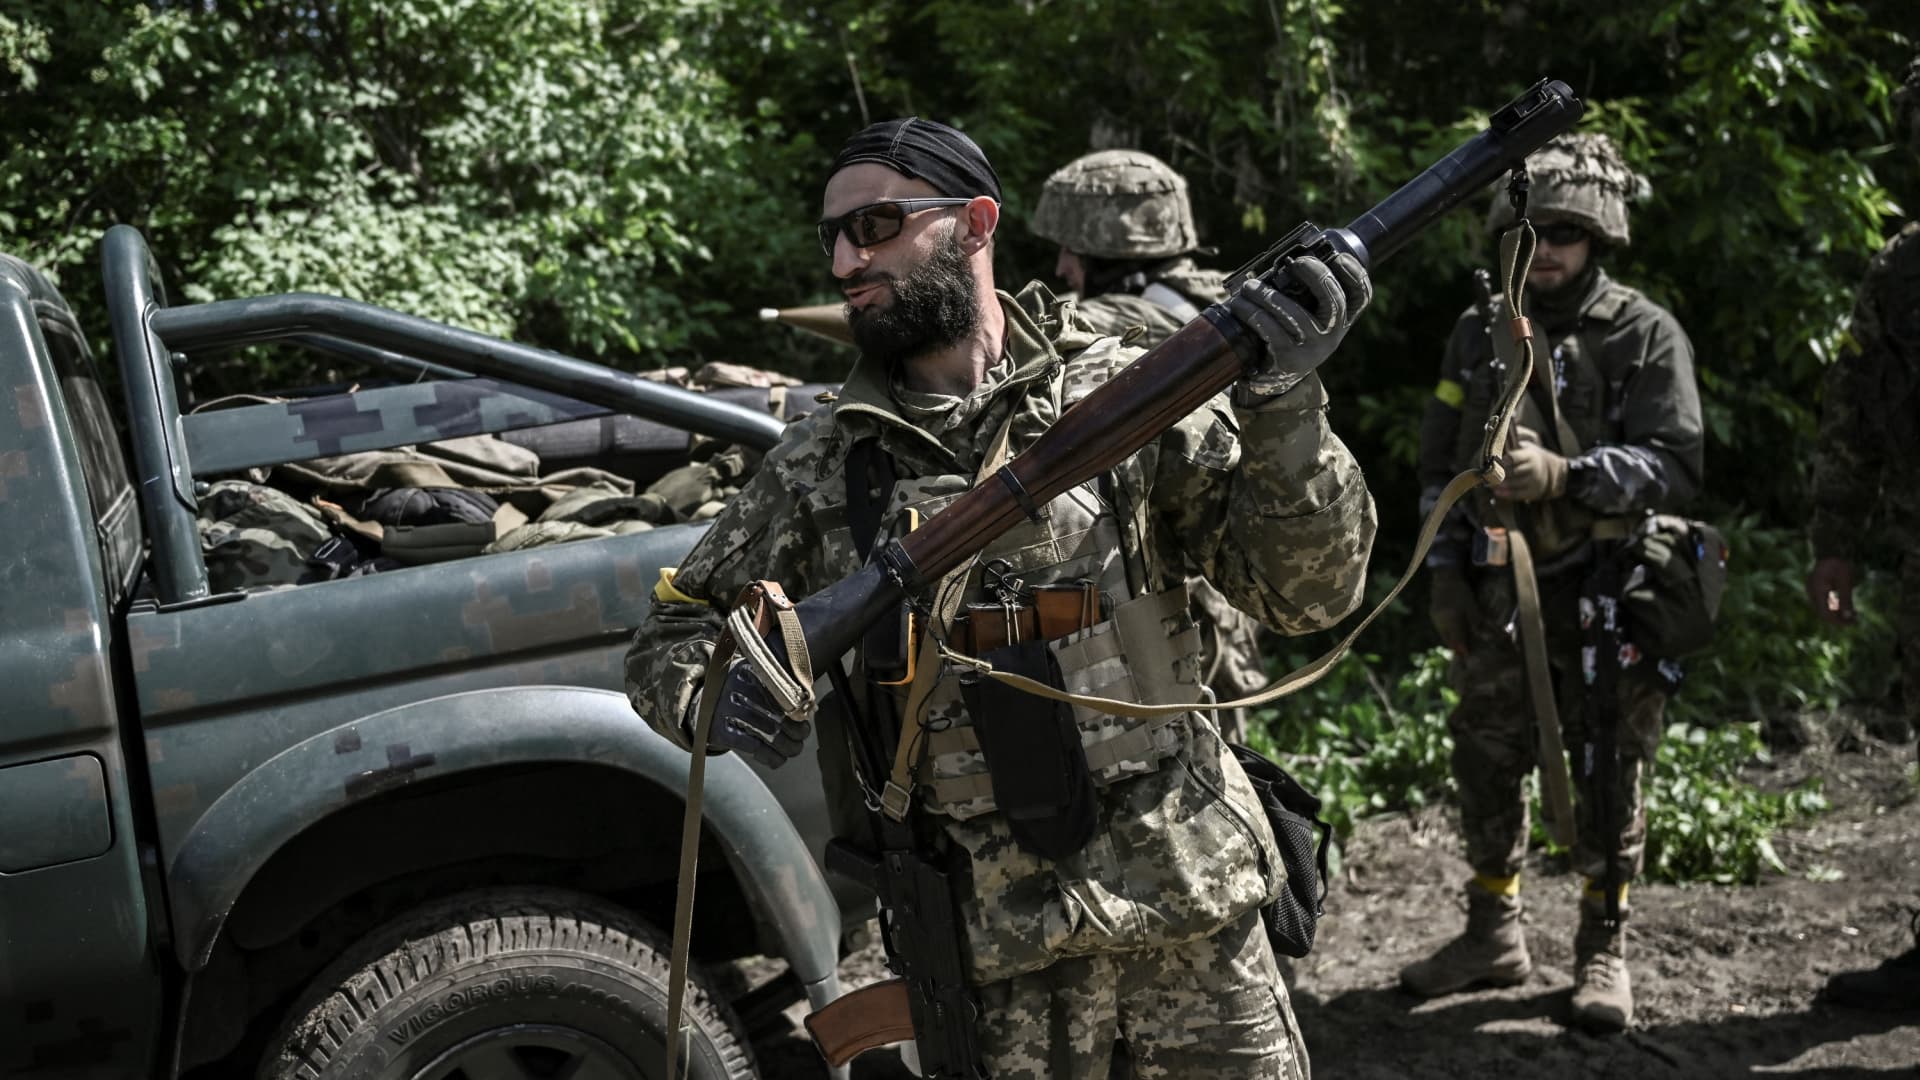 Ukrainian servicemen get ready to move toward the frontline at a checkpoint near the city of Lysychansk in the eastern Ukranian region of Donbas, on May 23, 2022, amid Russian invasion of Ukraine.